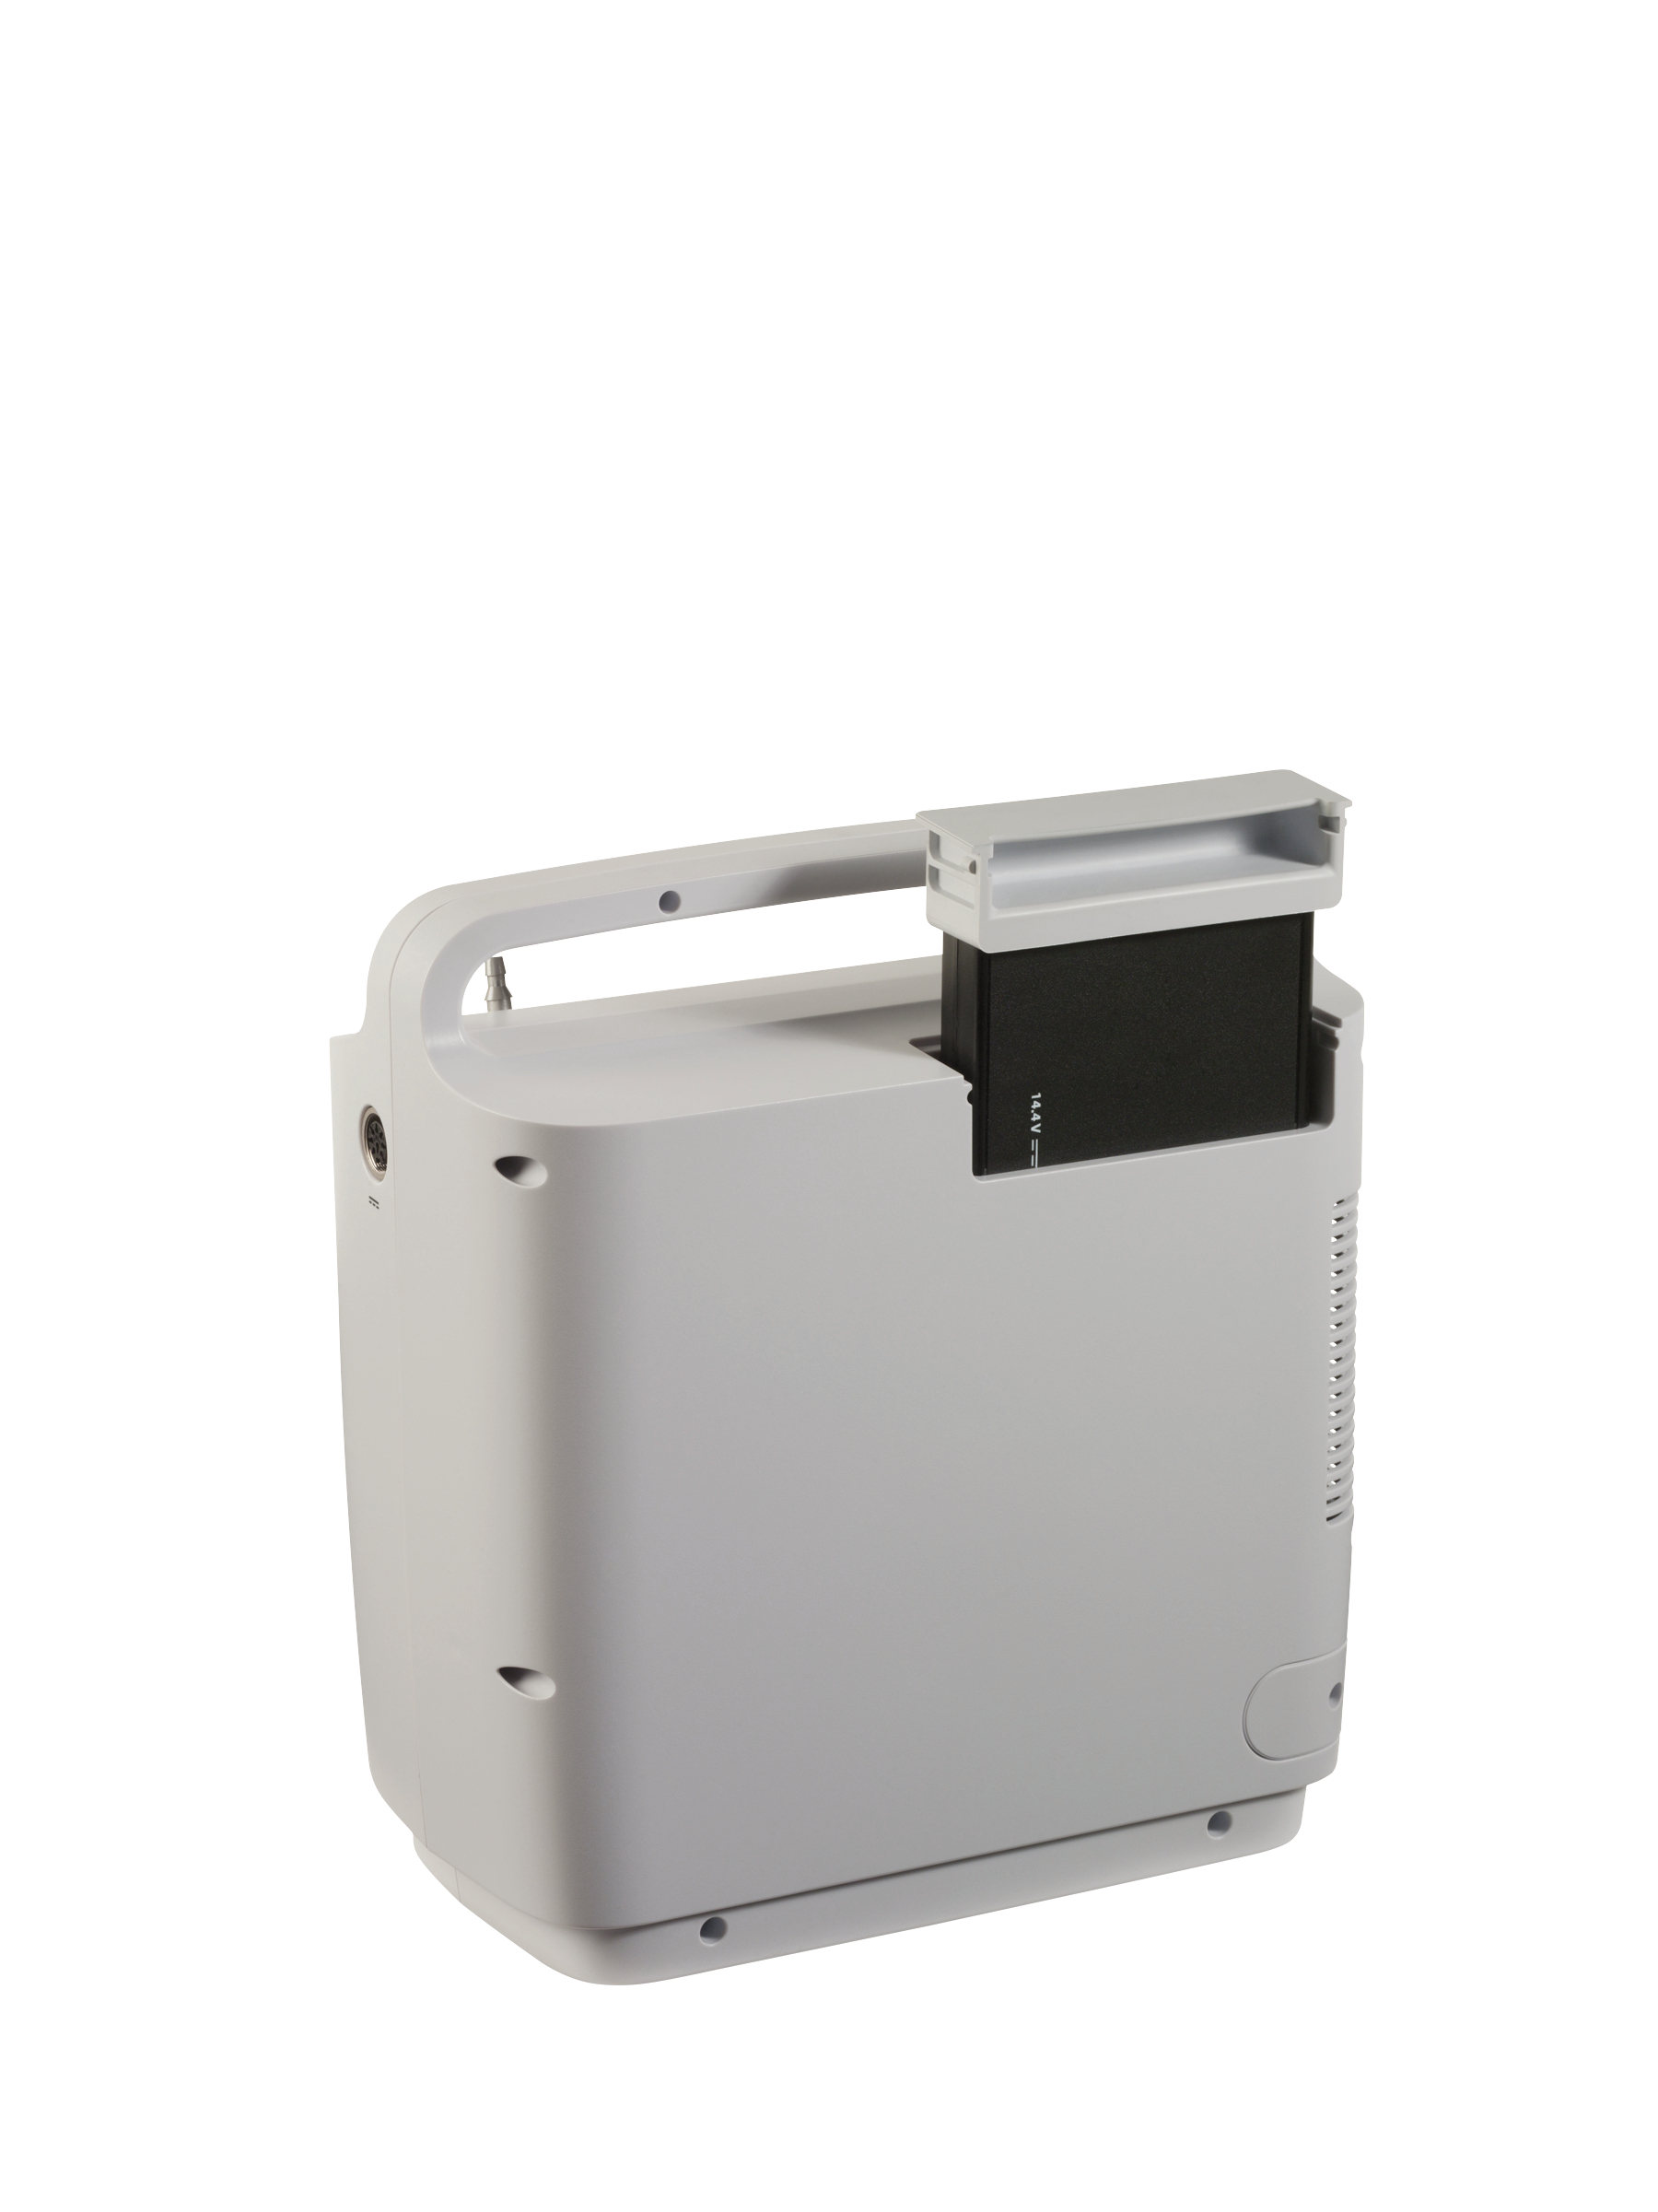 Photo of the SimplyGo Portable Oxygen Concentrator against a white background from the back view.